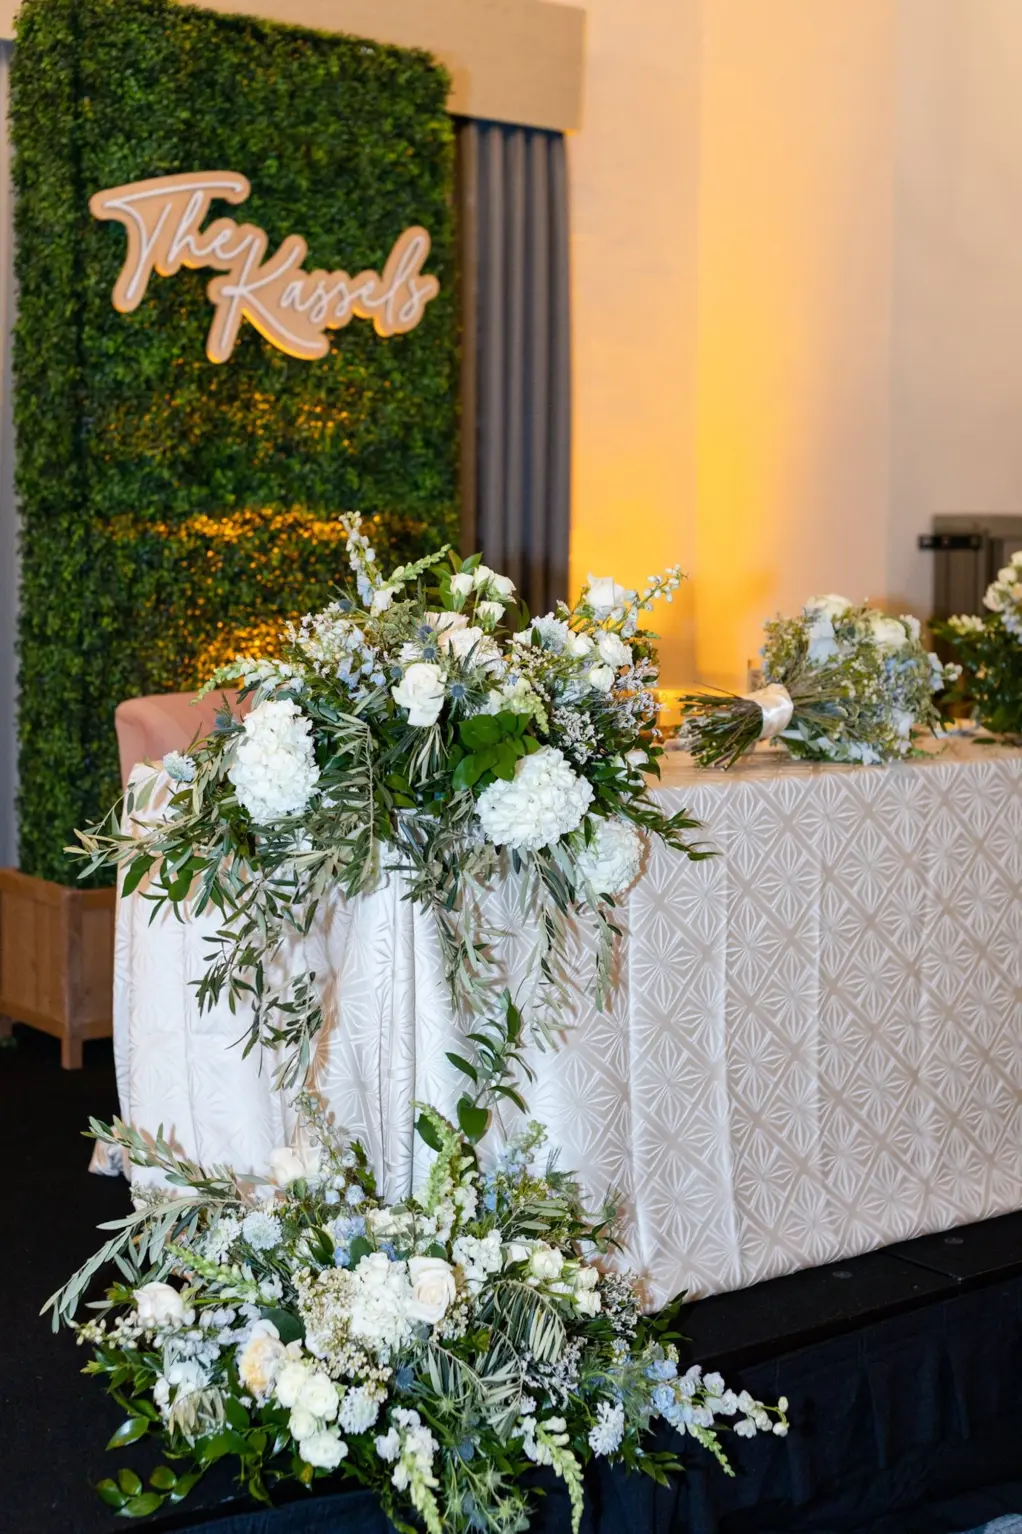 Classic White and Greenery Wedding Sweetheart Table Floral Ideas | St Pete Florist Lemon Drops